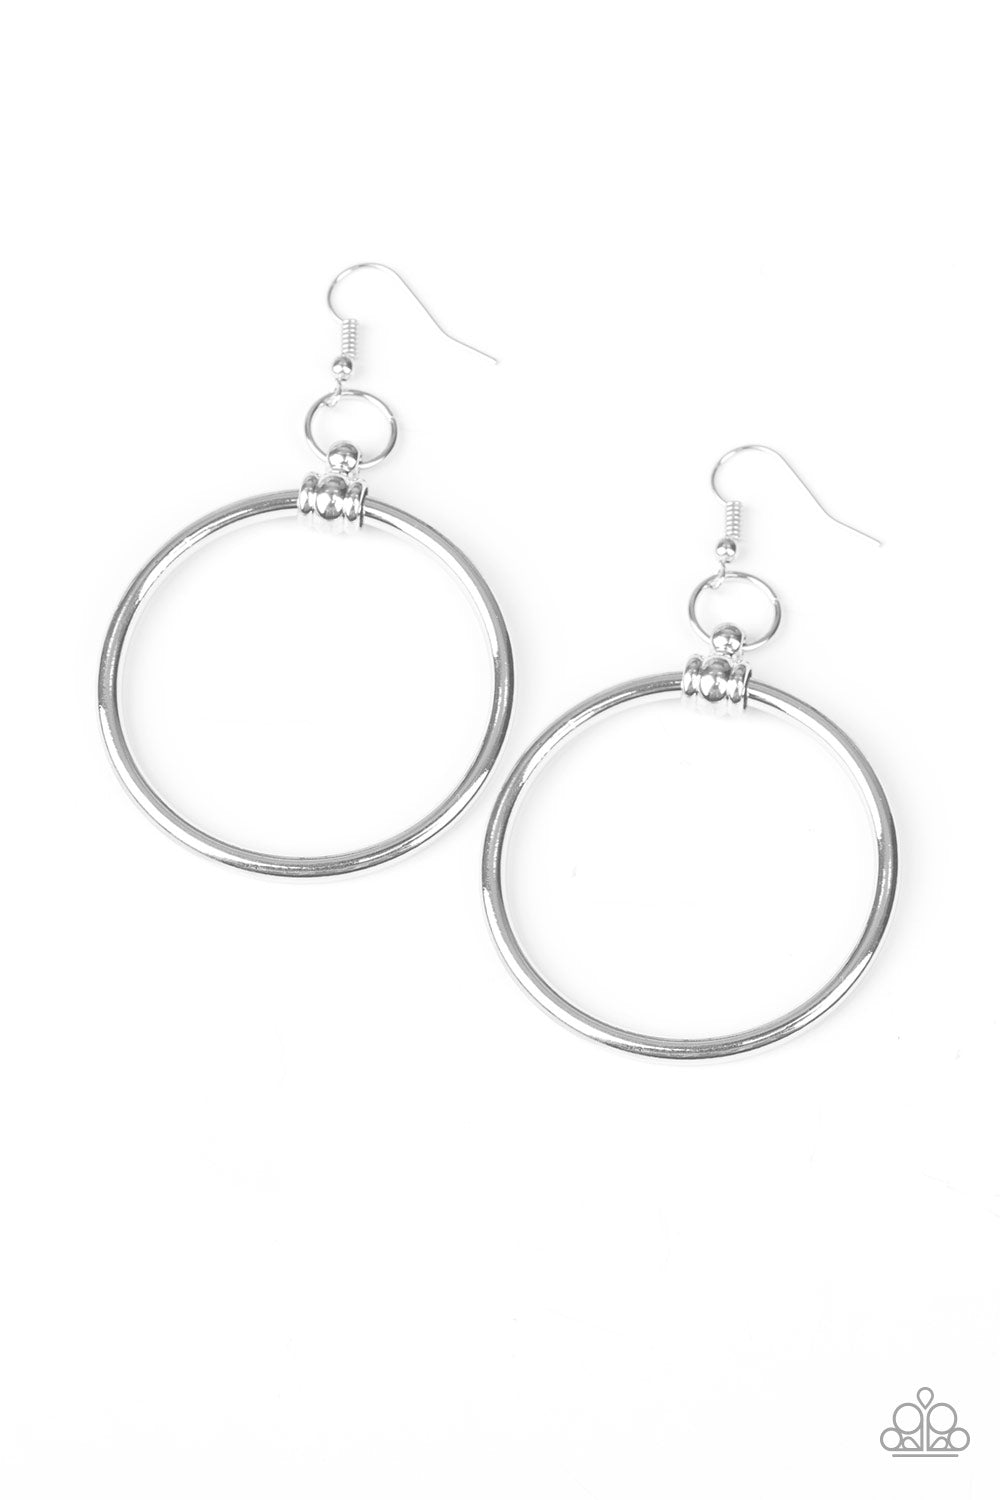 A thick silver ring is threaded through the center of an ornate silver fitting, creating a refined hoop. Earring attaches to a standard fishhook fitting.